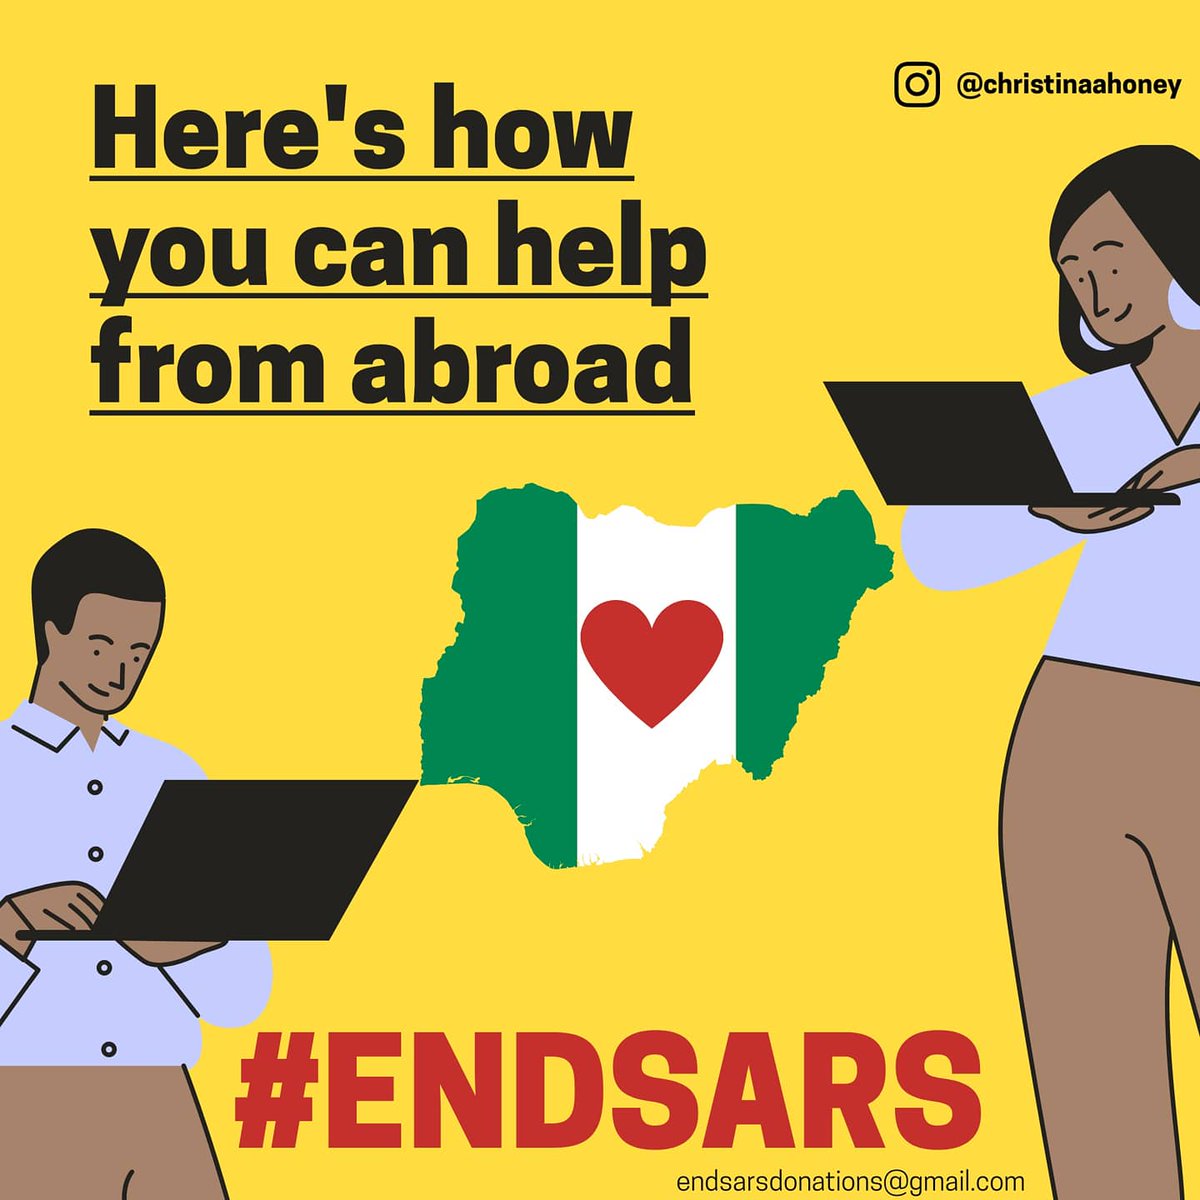 HOW TO HELP FROM ABROAD A THREAD...  #EndSARS  